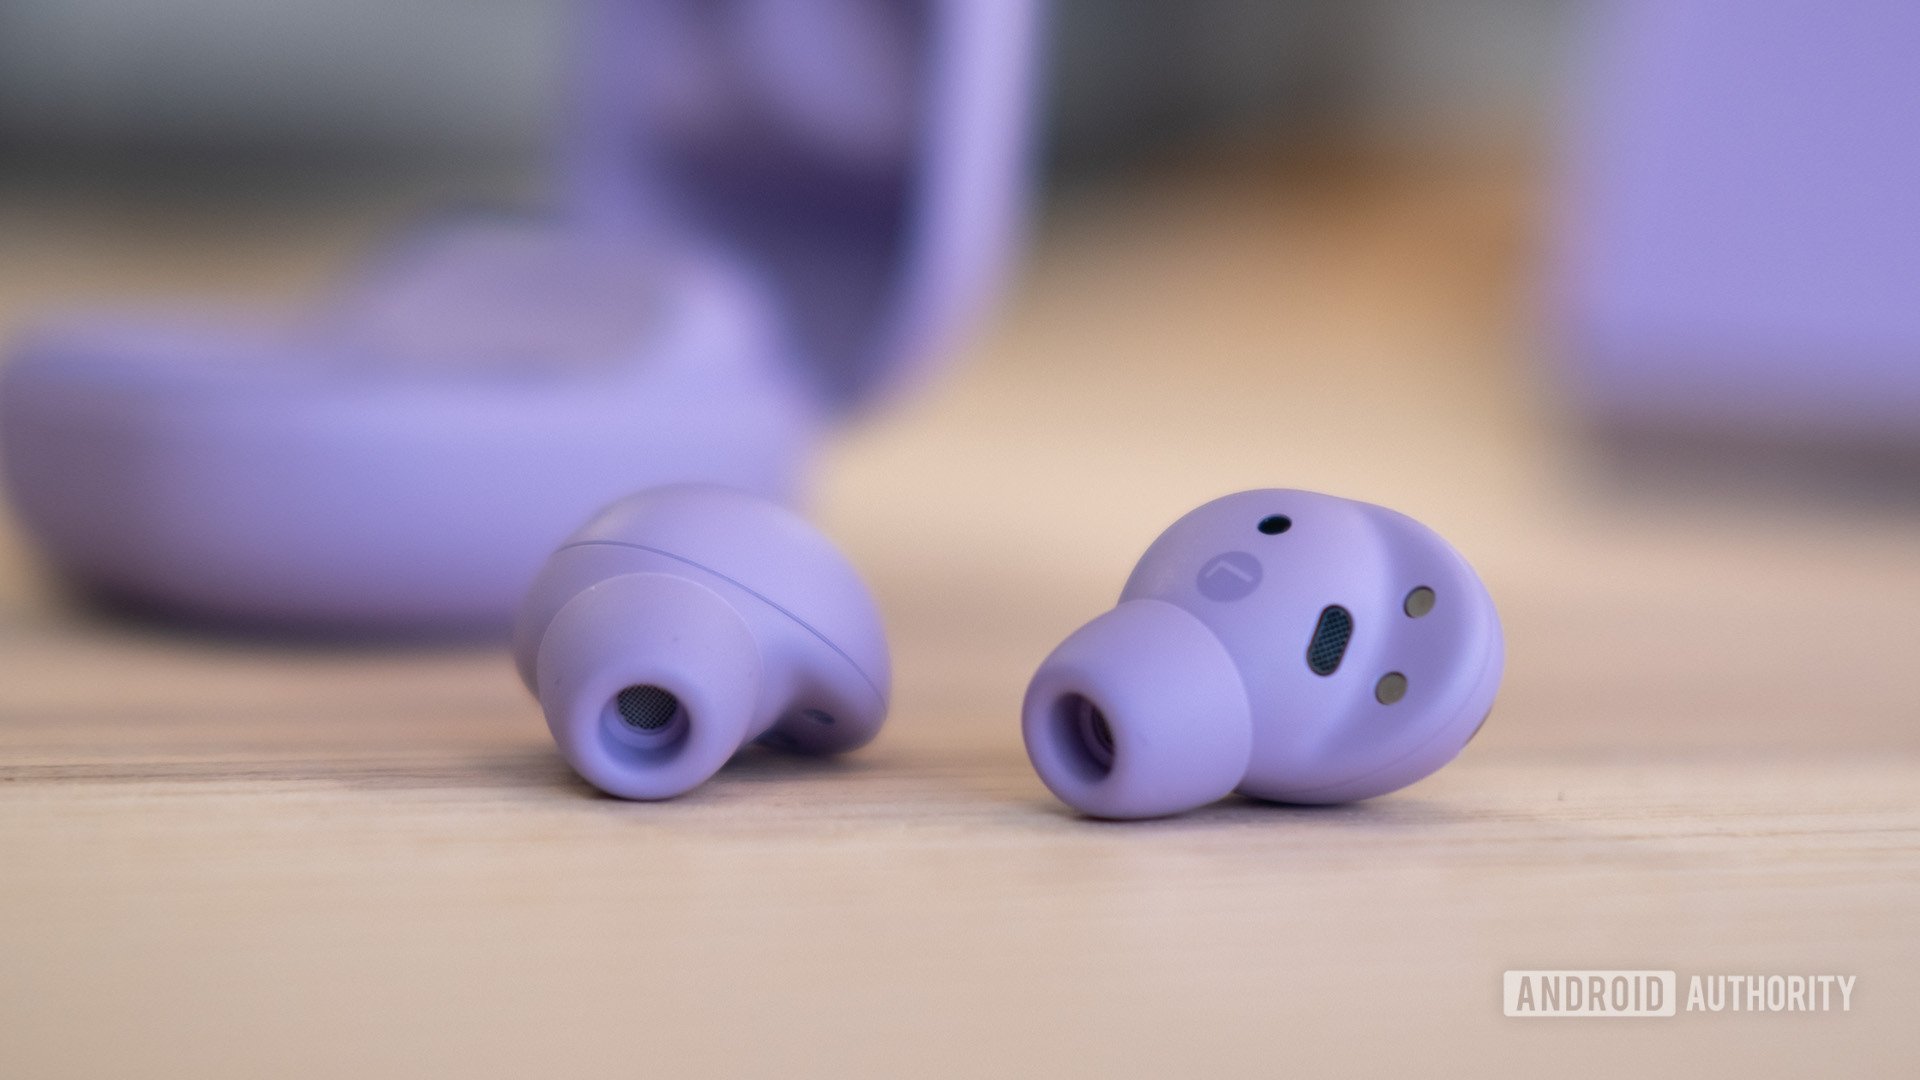 The Samsung Galaxy Buds 2 Pro earbuds lying on a table with their case visible, though blurry, in the background.